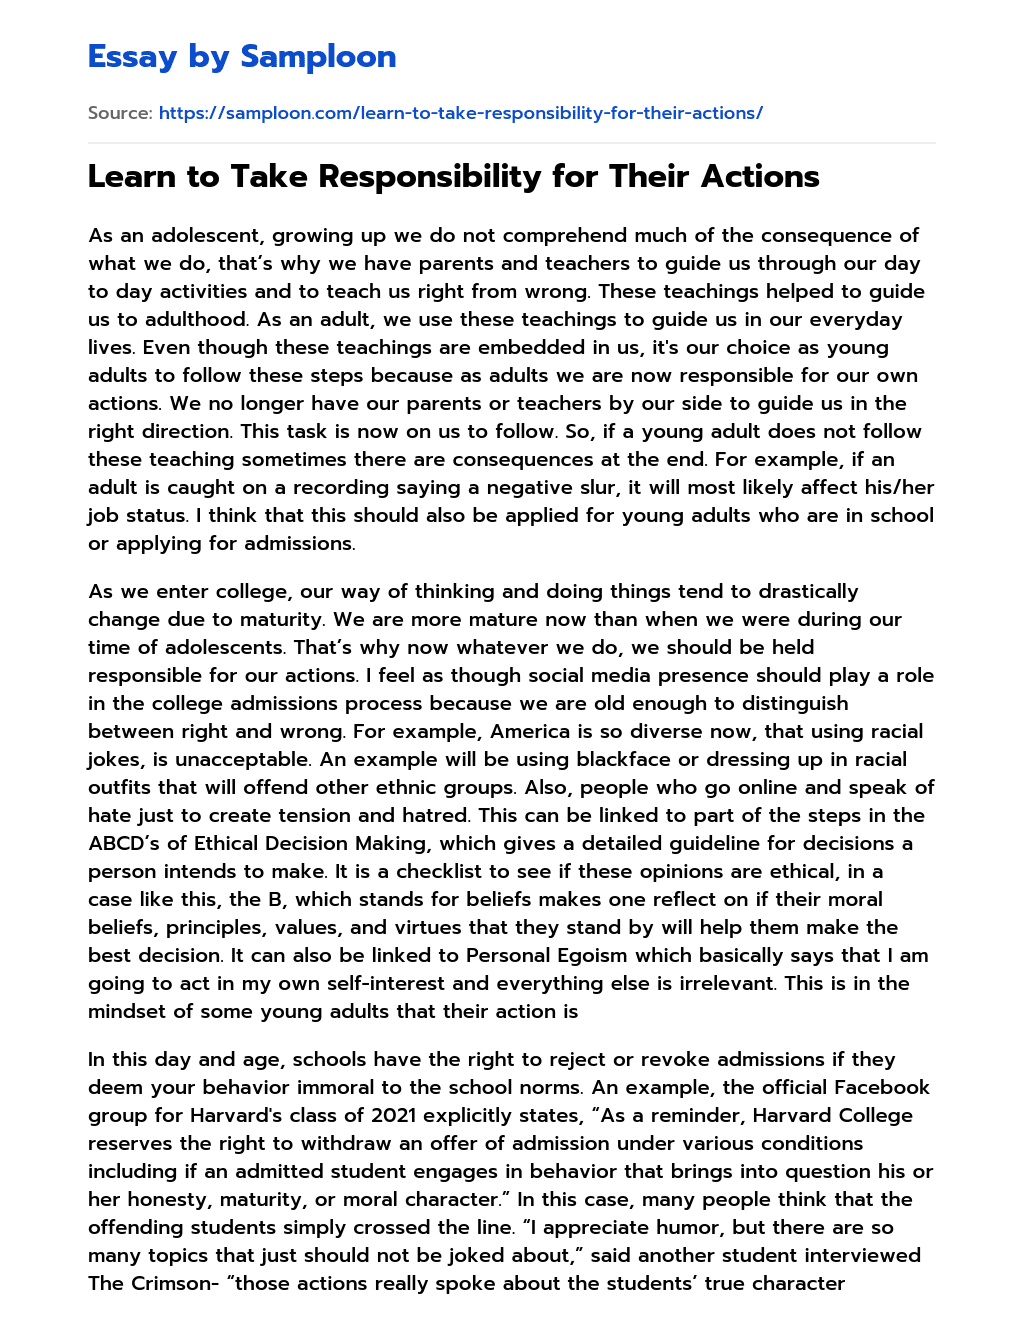 Learn to Take Responsibility for Their Actions essay